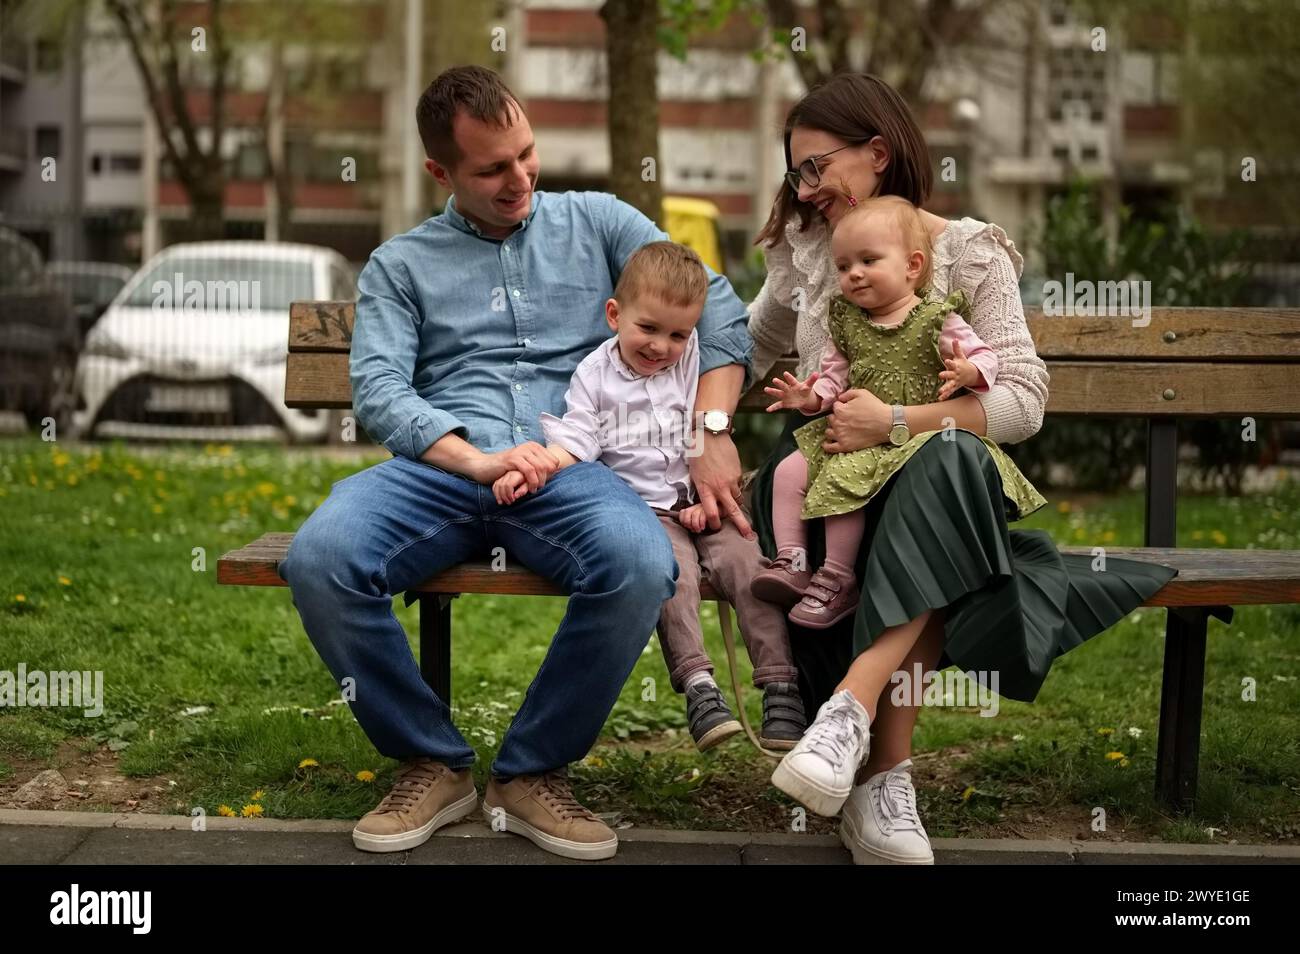 Family with two children sitting on a bench in the park Stock Photo